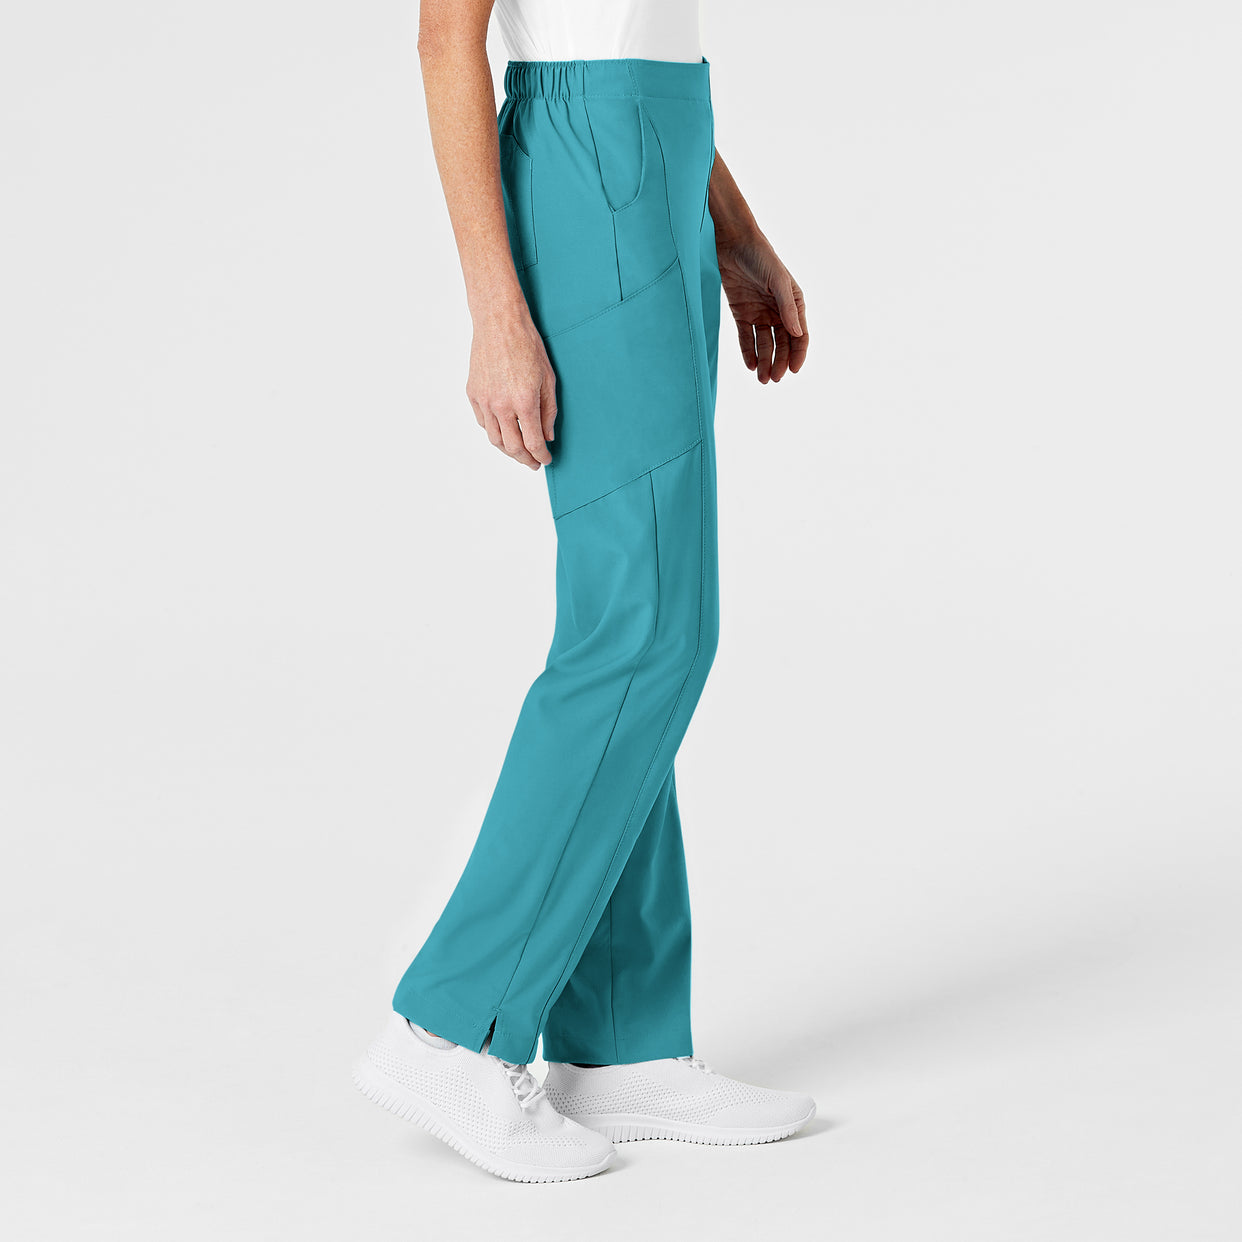 W123 Women's Flat Front Cargo Scrub Pant Teal Blue side view